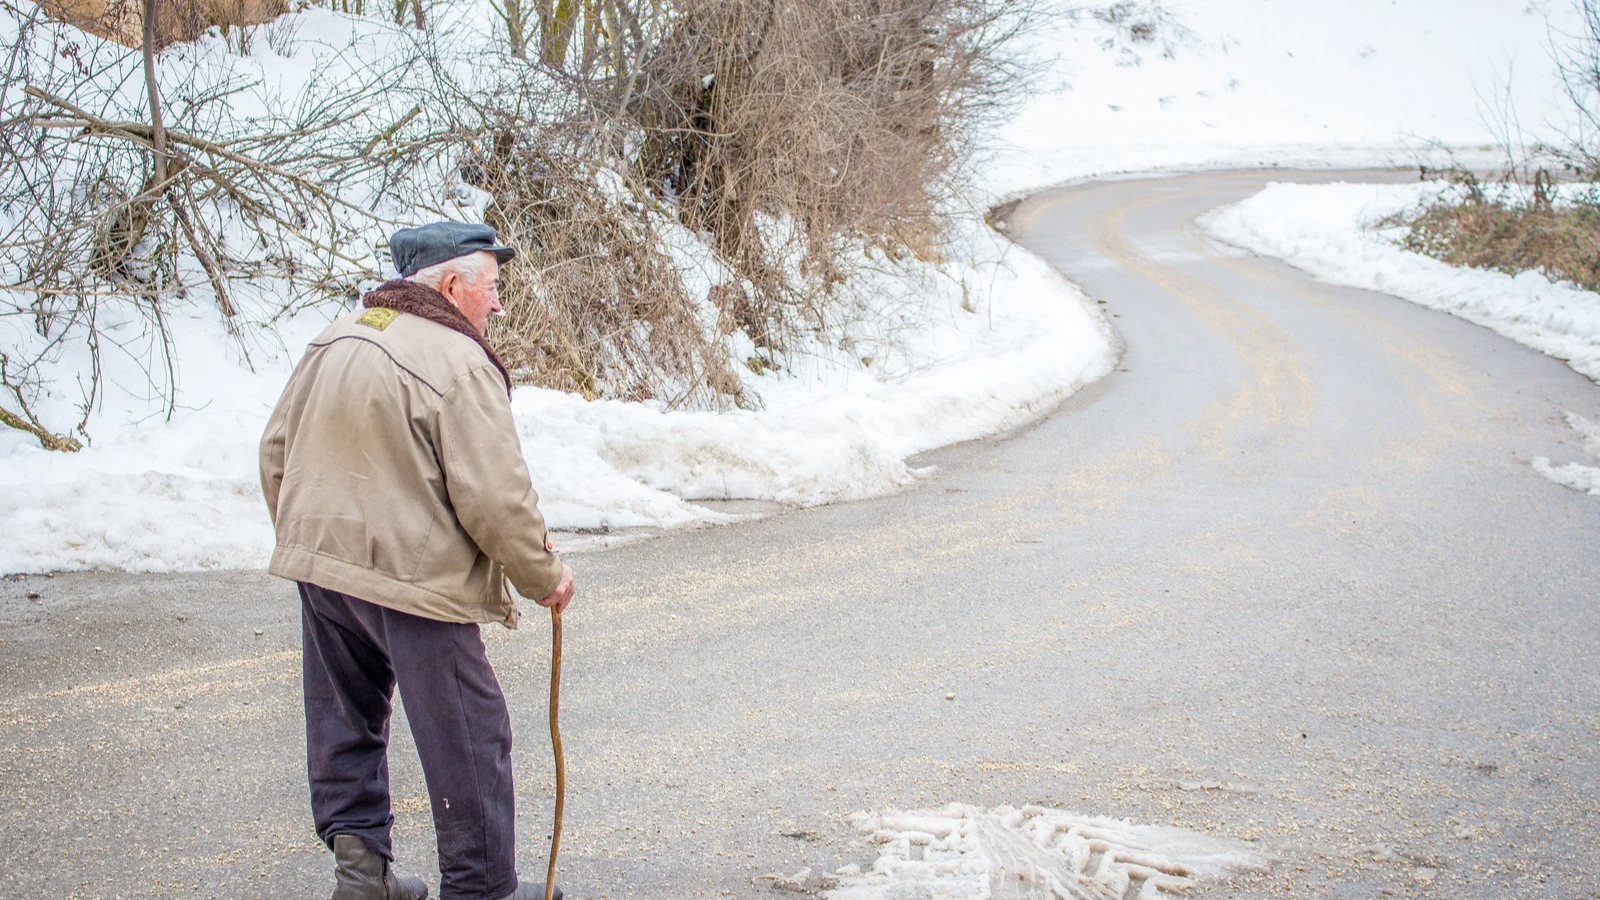 Slippery Conditions Causing Fear of Falling? 5 Tips to Prevent Falls Outside